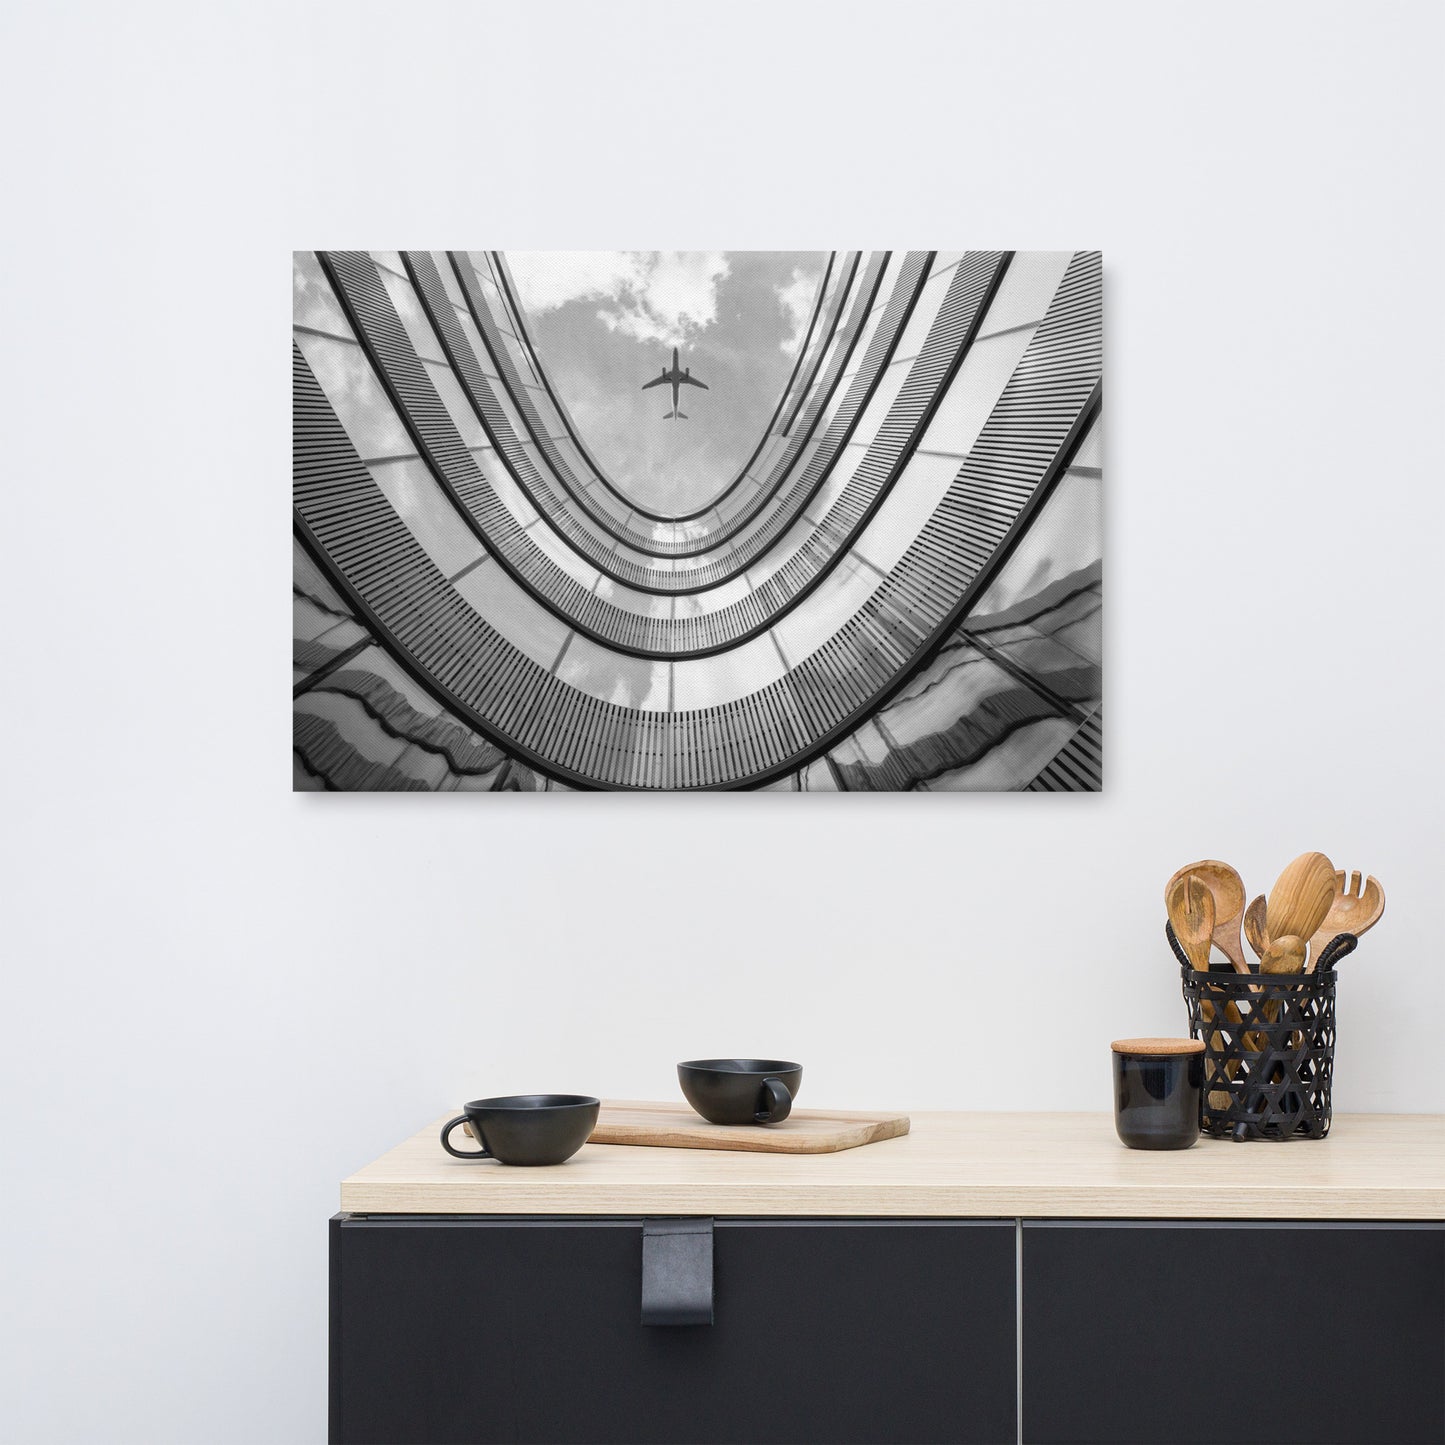 Urban Intersections in the Sky Architectural Photograph Canvas Wall Art Print